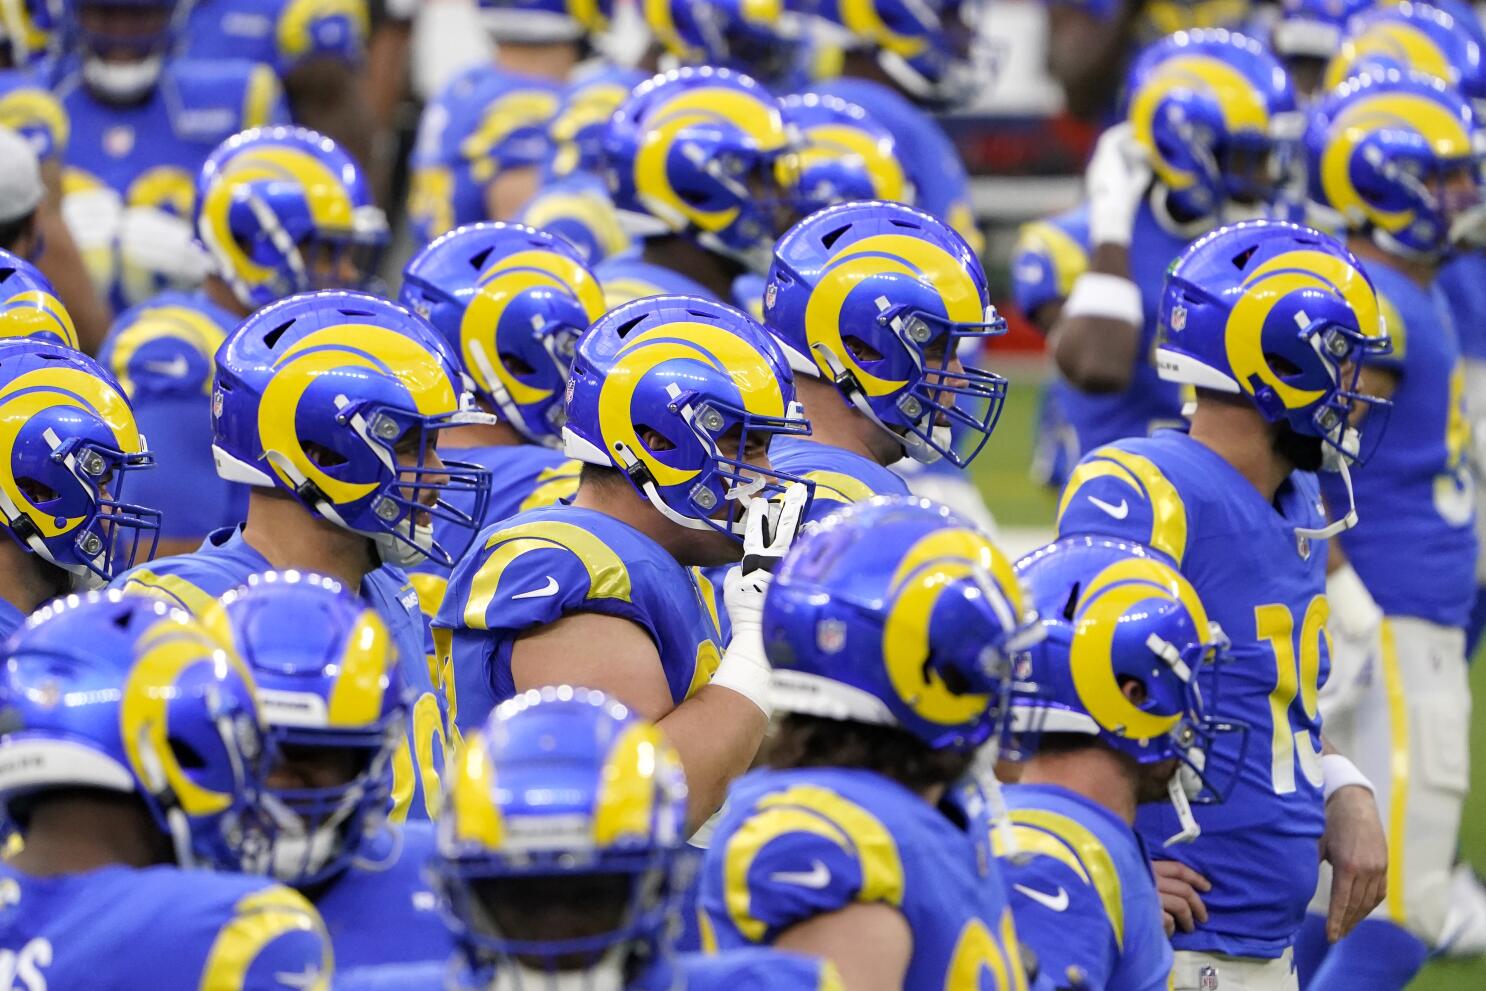 The Los Angeles Rams 2019 uniform schedule is released - Turf Show